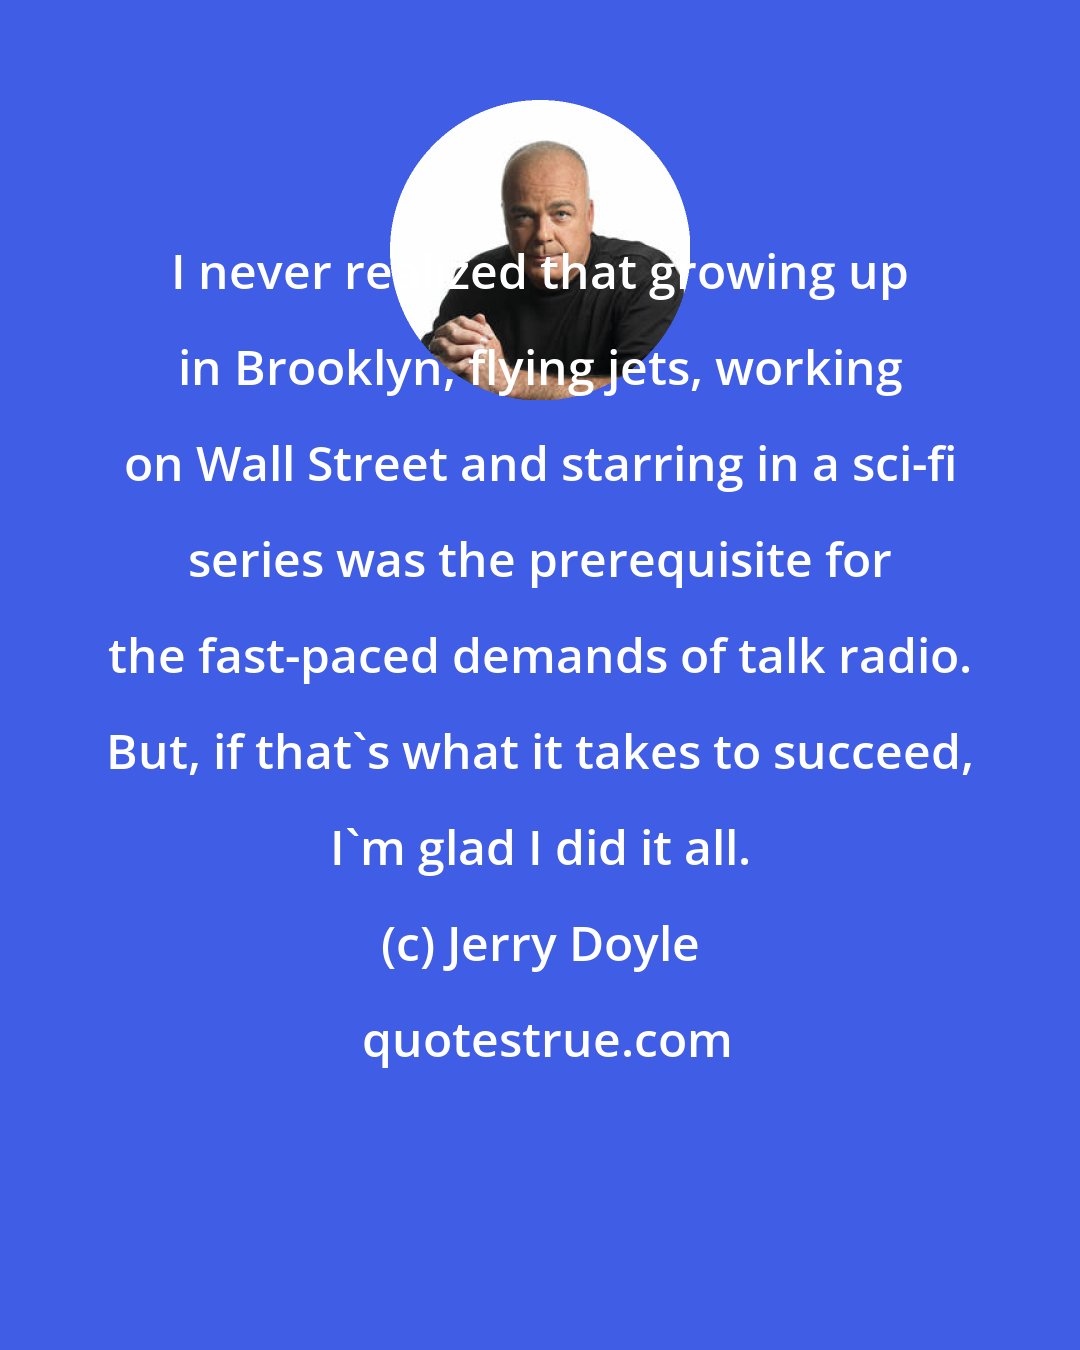 Jerry Doyle: I never realized that growing up in Brooklyn, flying jets, working on Wall Street and starring in a sci-fi series was the prerequisite for the fast-paced demands of talk radio. But, if that's what it takes to succeed, I'm glad I did it all.